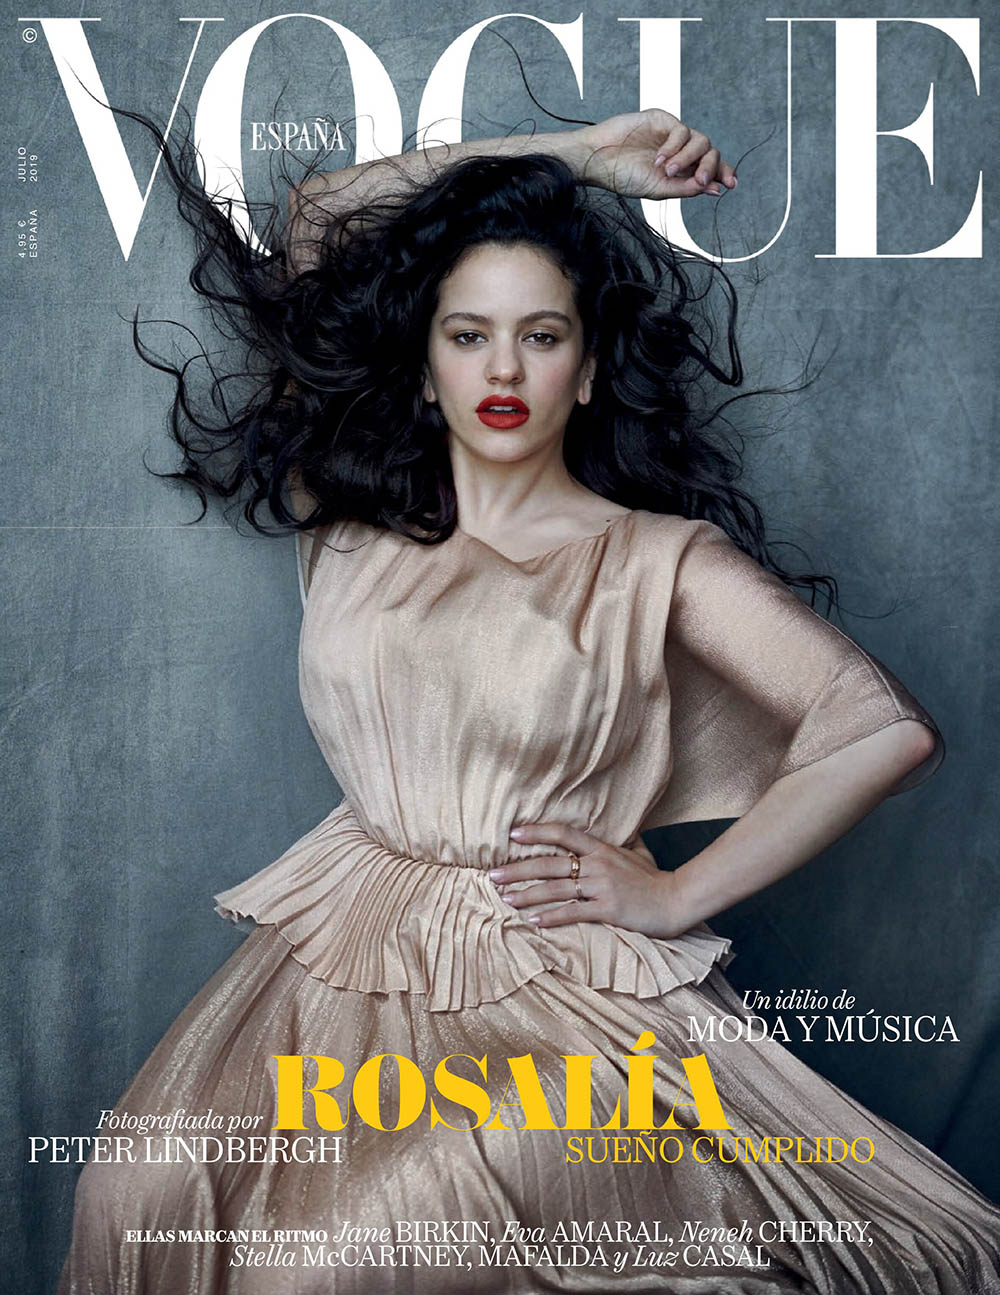 Rosalía covers Vogue Spain July 2019 by Peter Lindbergh